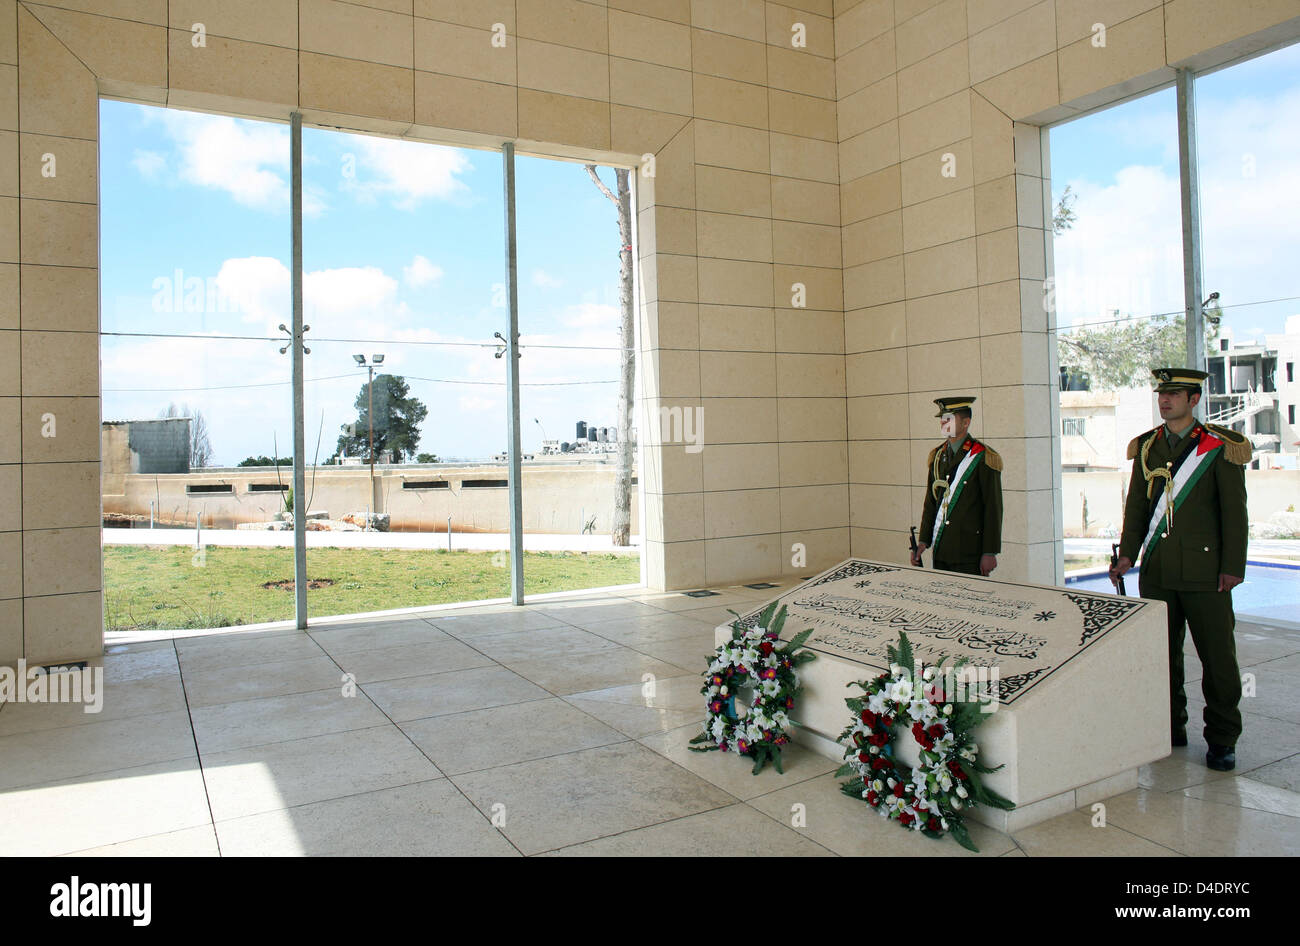 Interior view of the mausoleum of Yasser Arafat with the guard of honour in Ramallah, Palestinian Autonomous Territories, 27 February 2008. Yasser Arafat, also referred to as 'Abu Ammar', had served as Chairman of the Palestine Liberation Organisation (PLO) for decades and as President of the Palestinian National Authority (PA) before he died aged 75 on 11 November 2004 in Paris, F Stock Photo